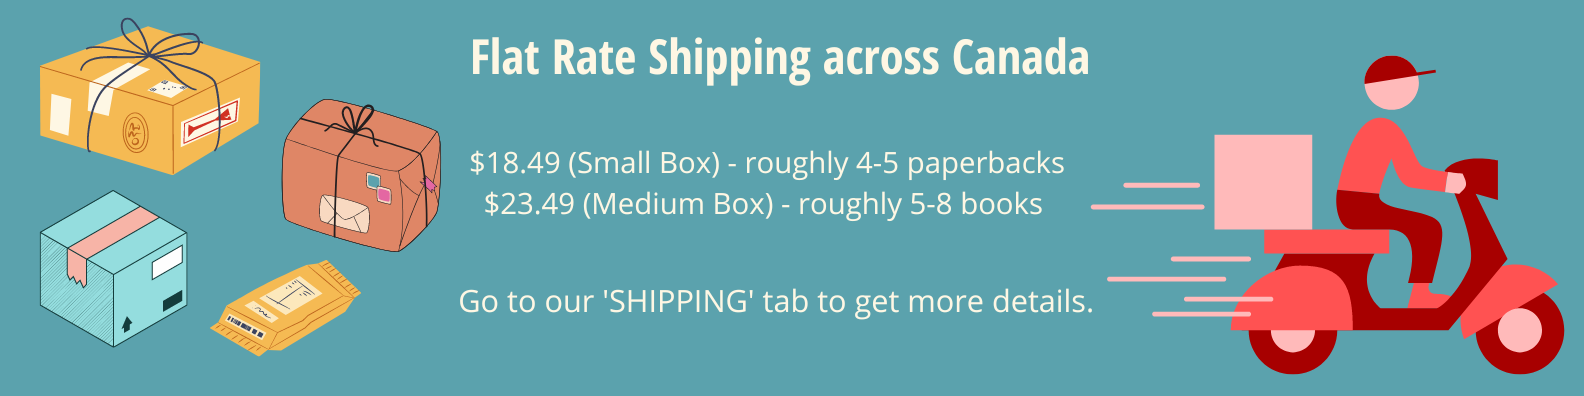 The Sherwood Park Bookworm offers flat rate shipping to any address in Canada